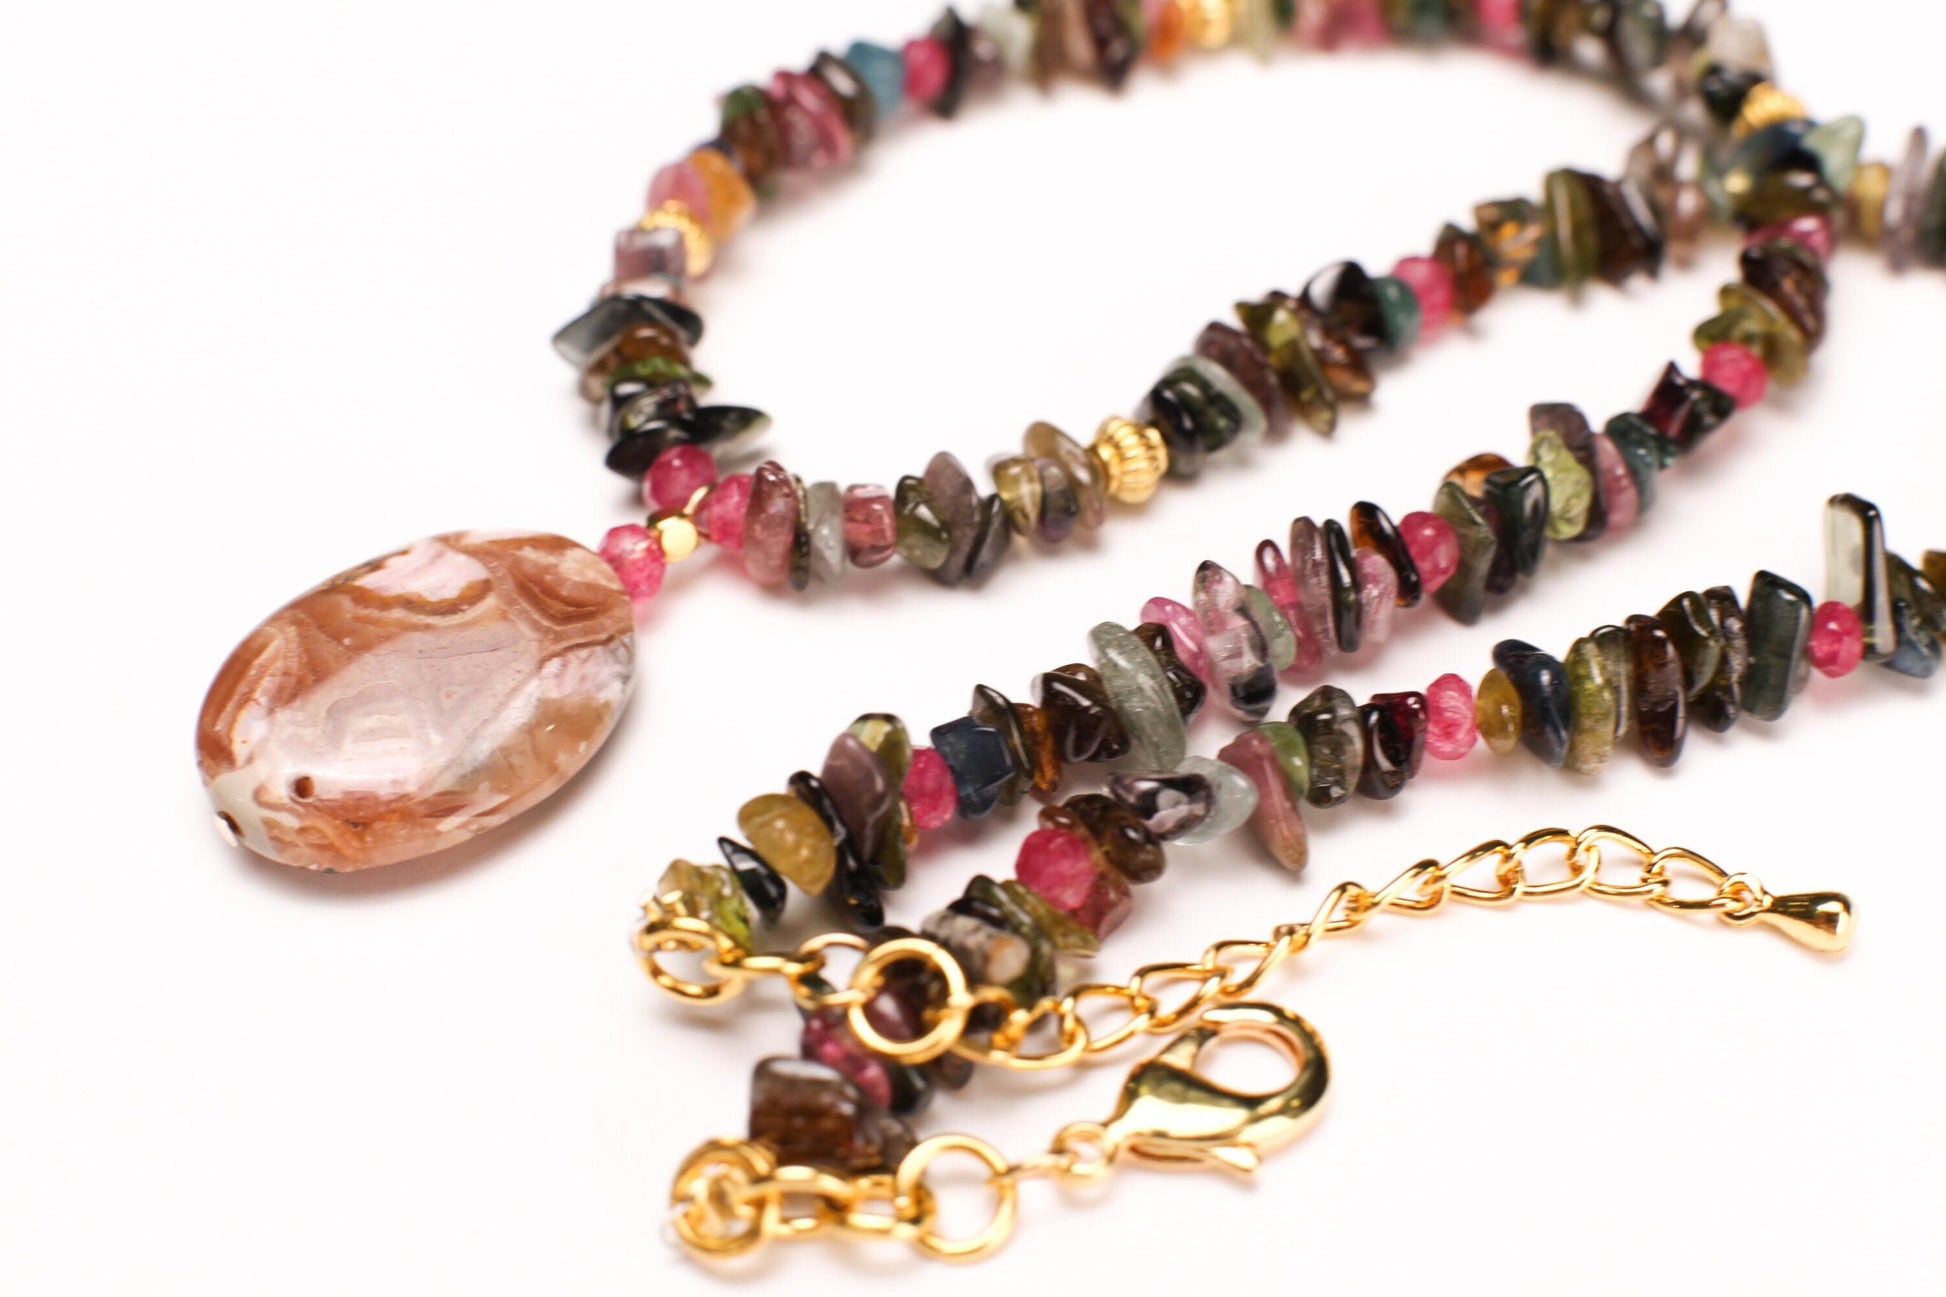 Natural Rhodochrosite 18x25mm Oval pendant, Multi Tourmaline raw nugget chips, Gold Necklace 16&quot; with 2&quot; Extension Chain healing energy gif